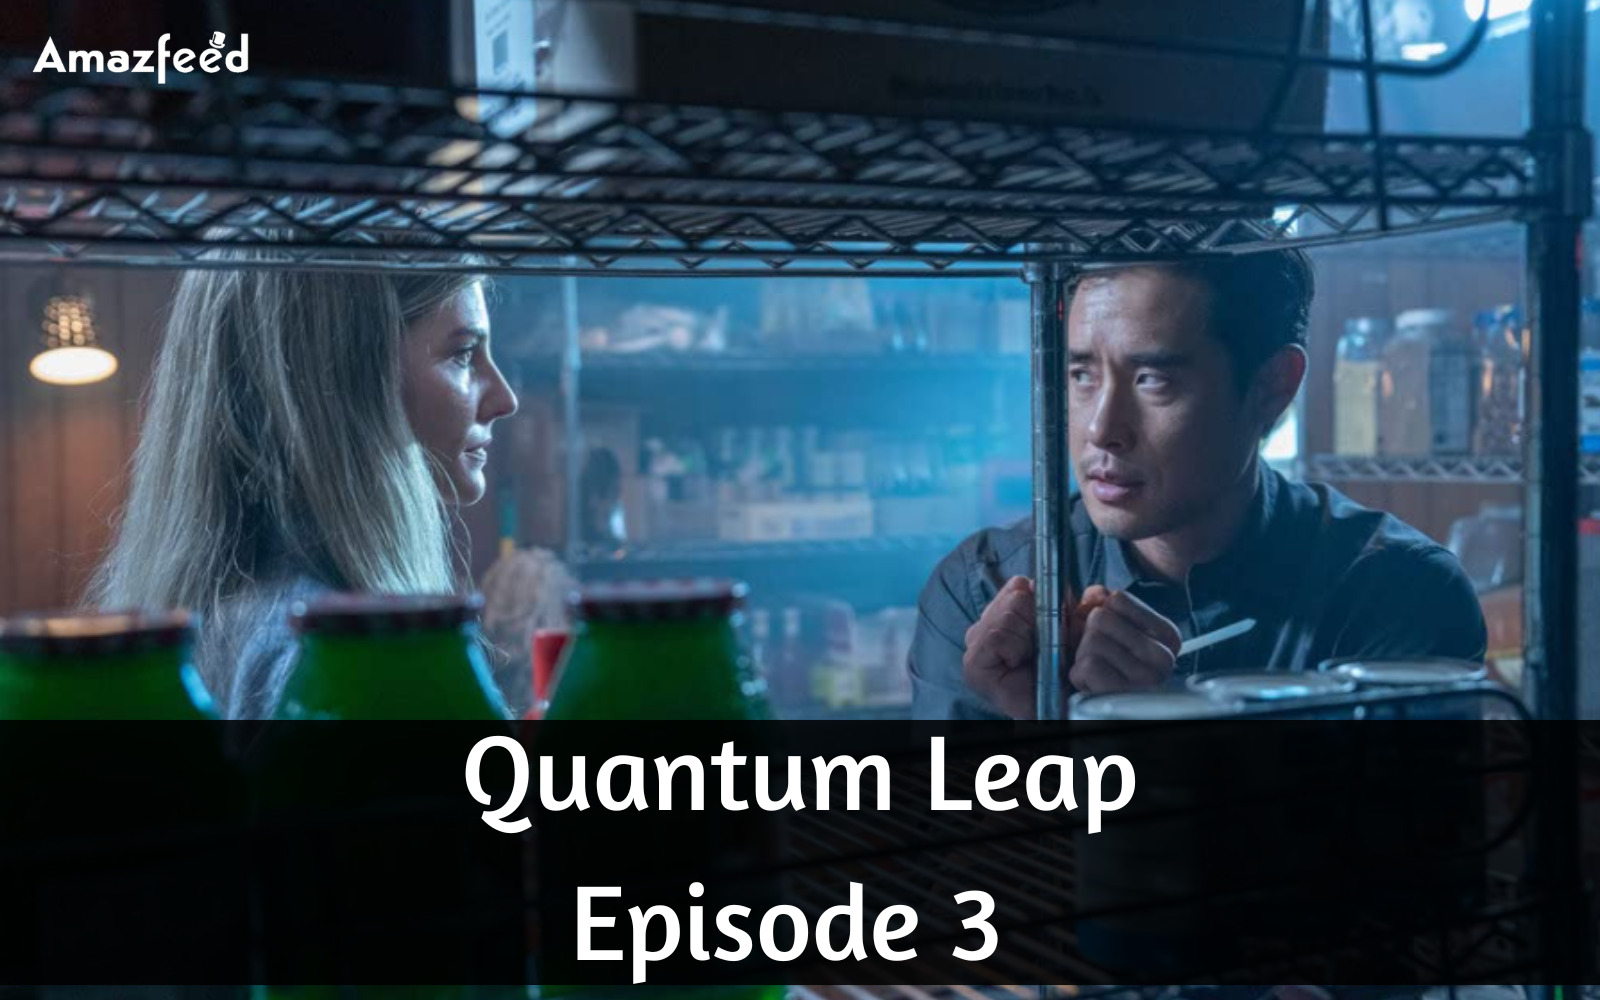 When Is Quantum Leap Episode 3 Coming Out (Release Date)